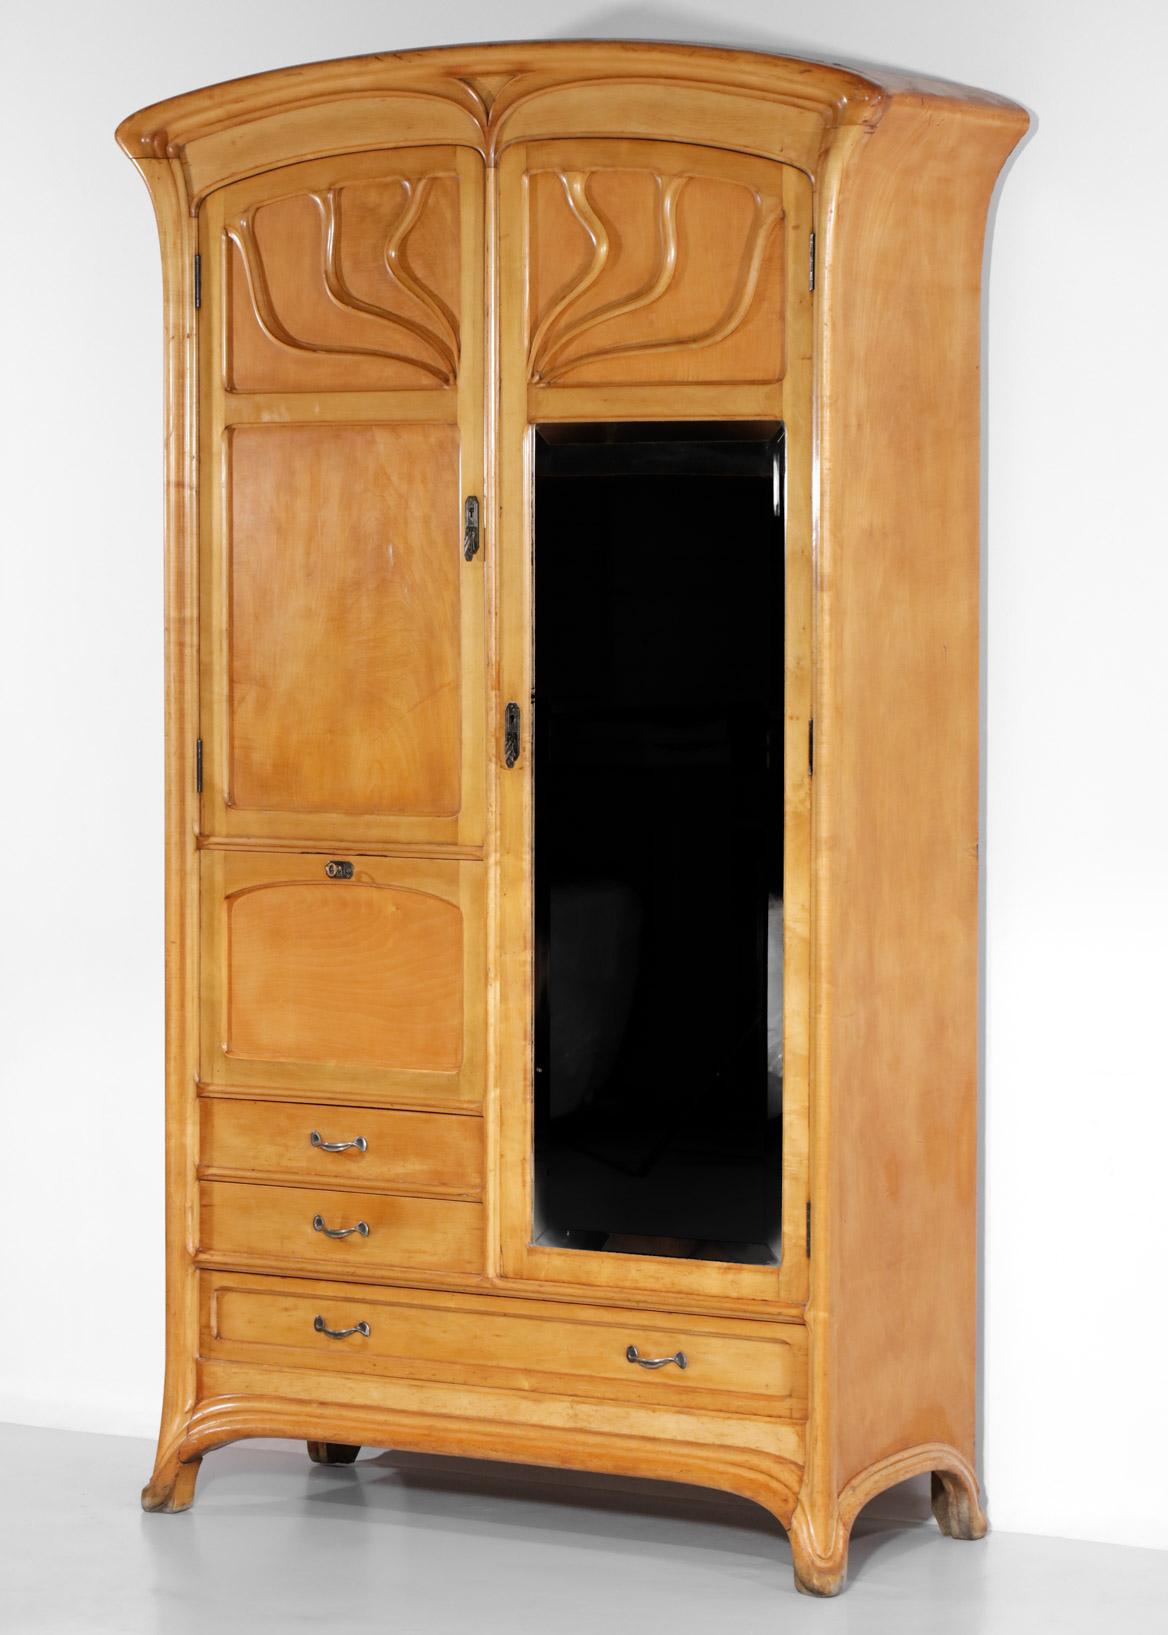 Superb French armoire from the art nouveau period of the 1920's in the style of Henry Van De Velde's work. Solid wood and veneer structure, it is composed of two hinged doors, one of which with a full height mirror, opening on a panderie on the